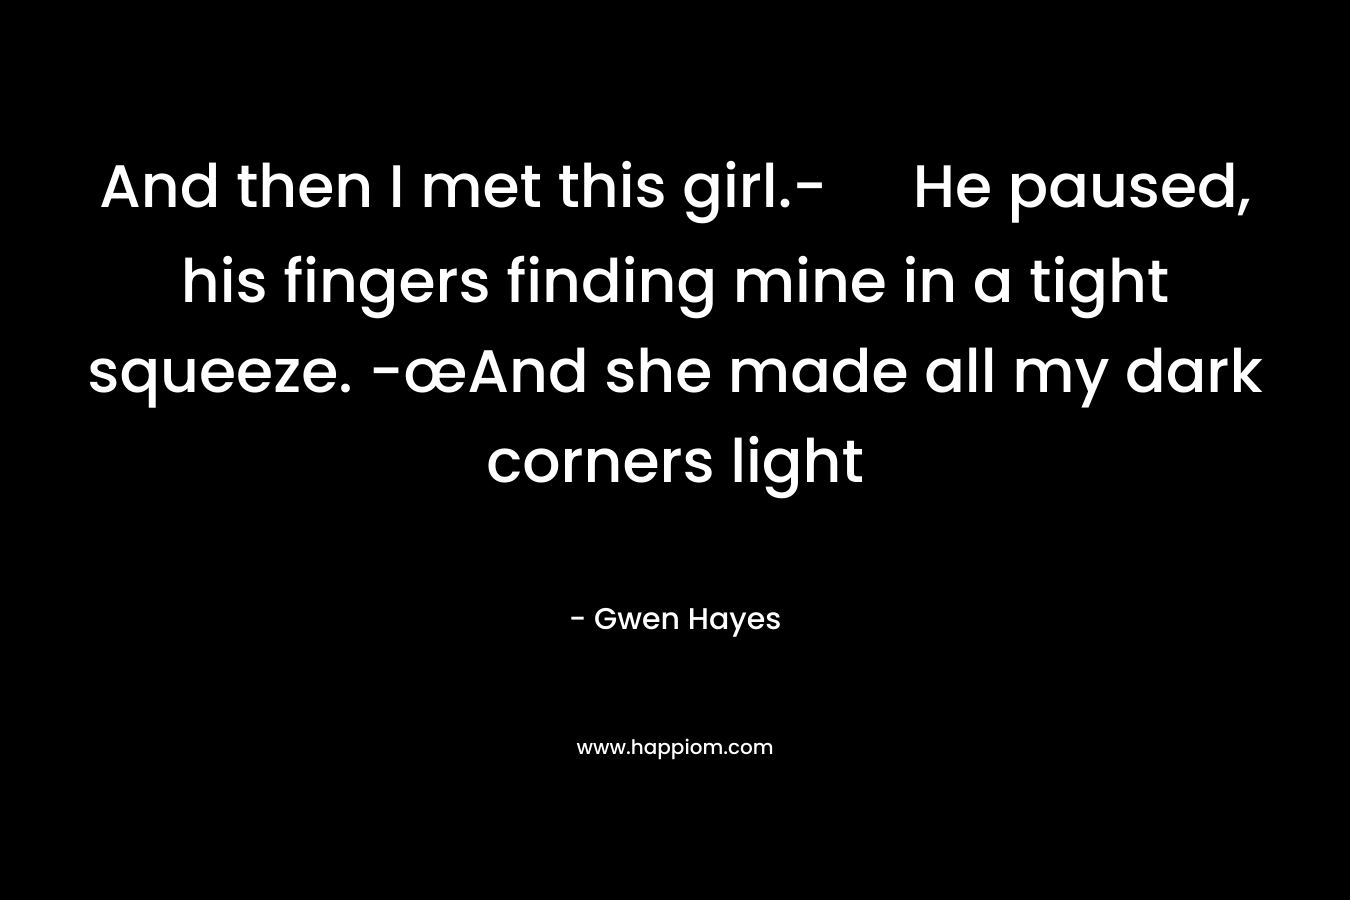 And then I met this girl.- He paused, his fingers finding mine in a tight squeeze. -œAnd she made all my dark corners light – Gwen Hayes